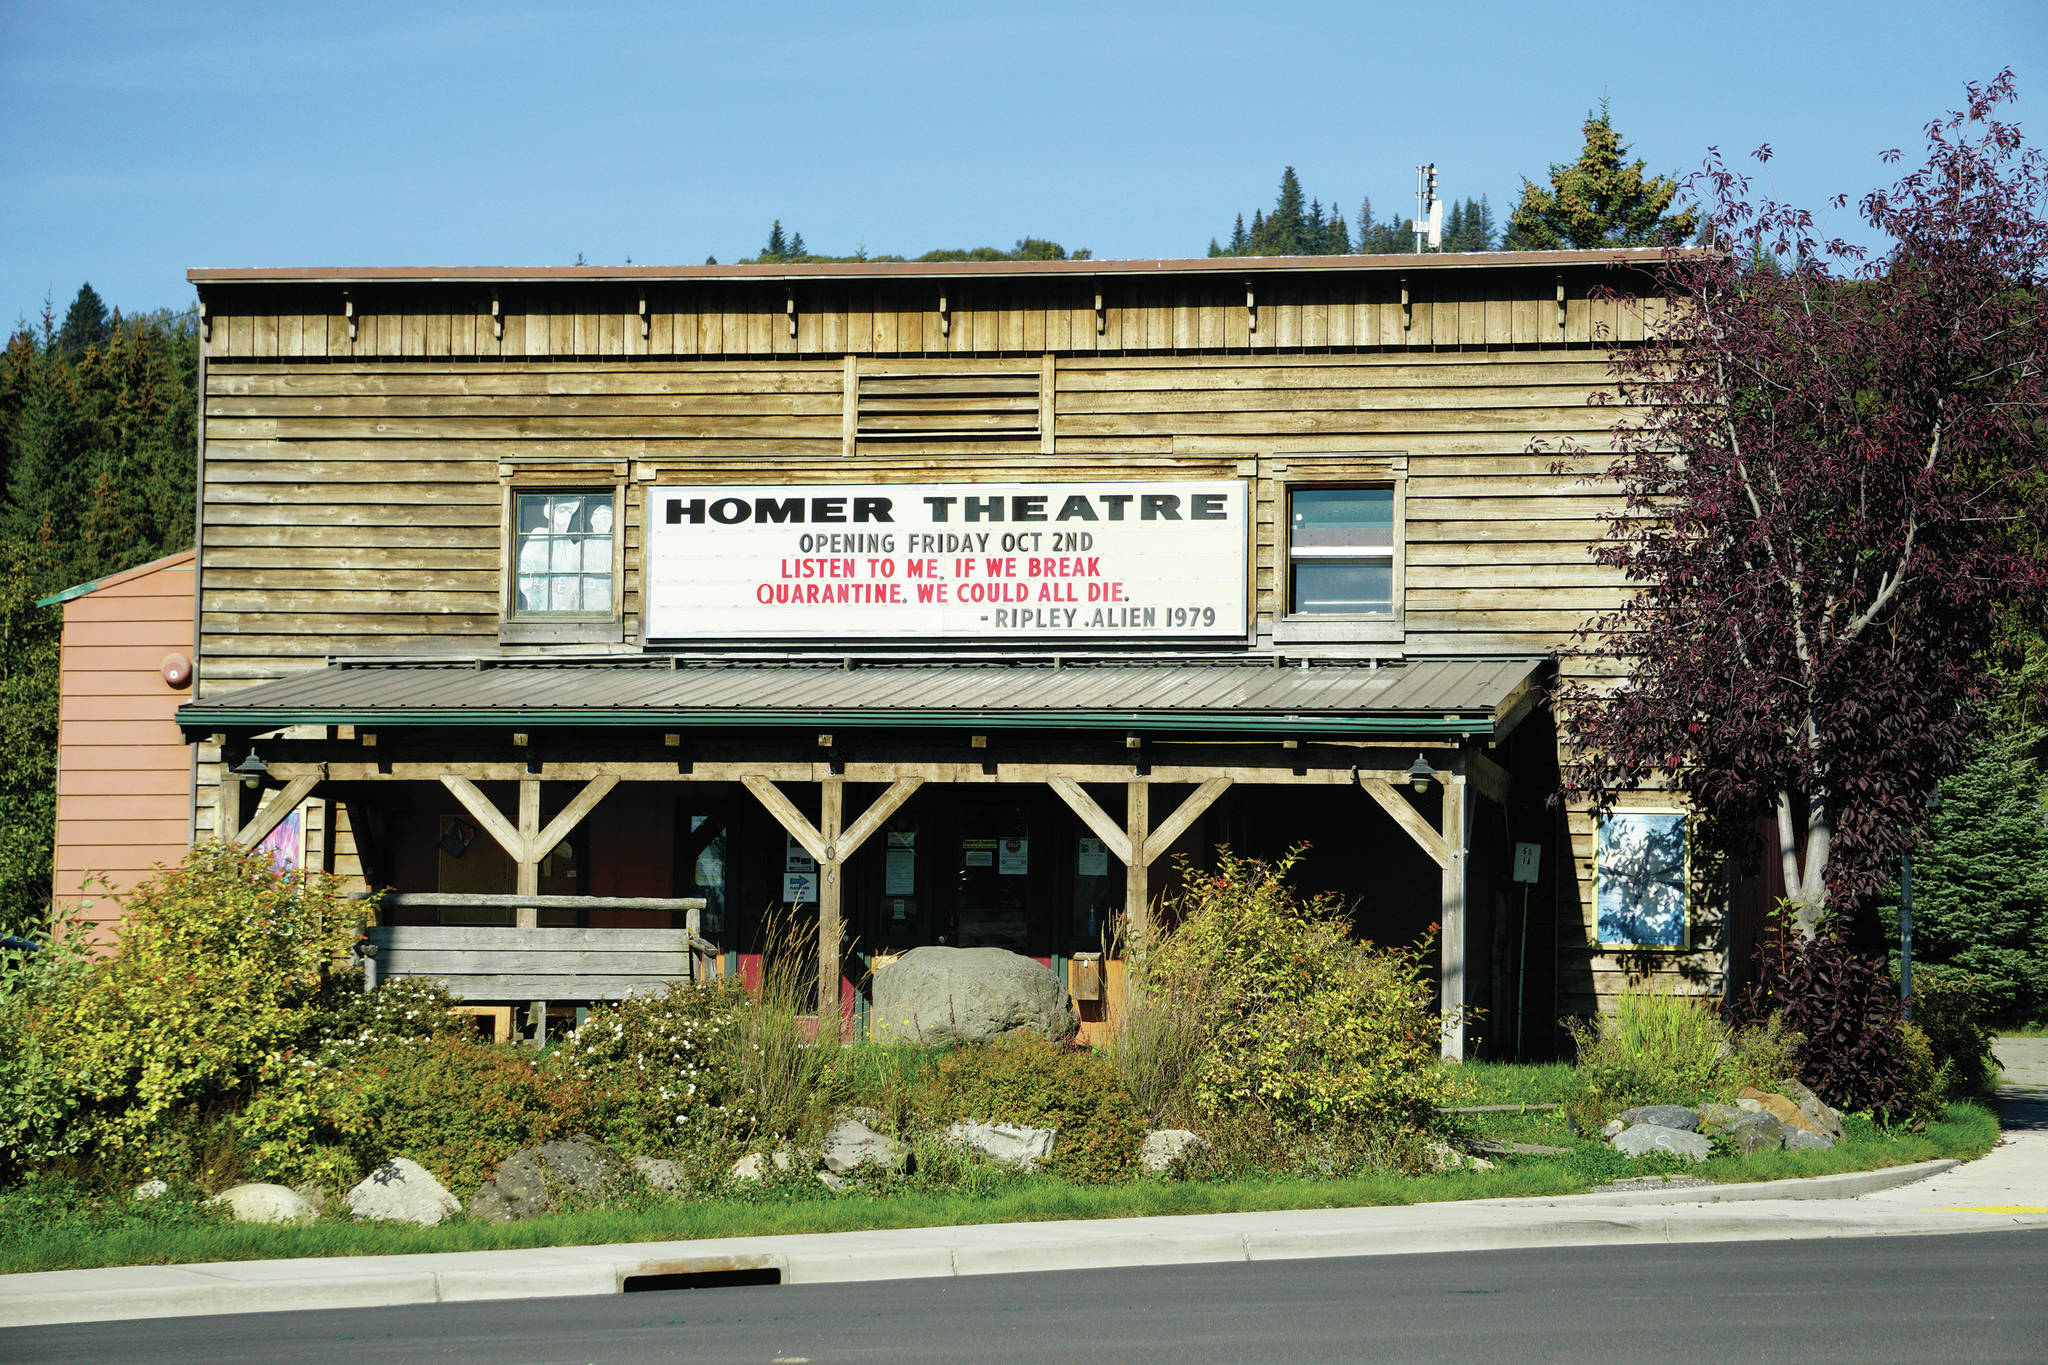 Homer Theatre re-opens — but cautiously with restrictions